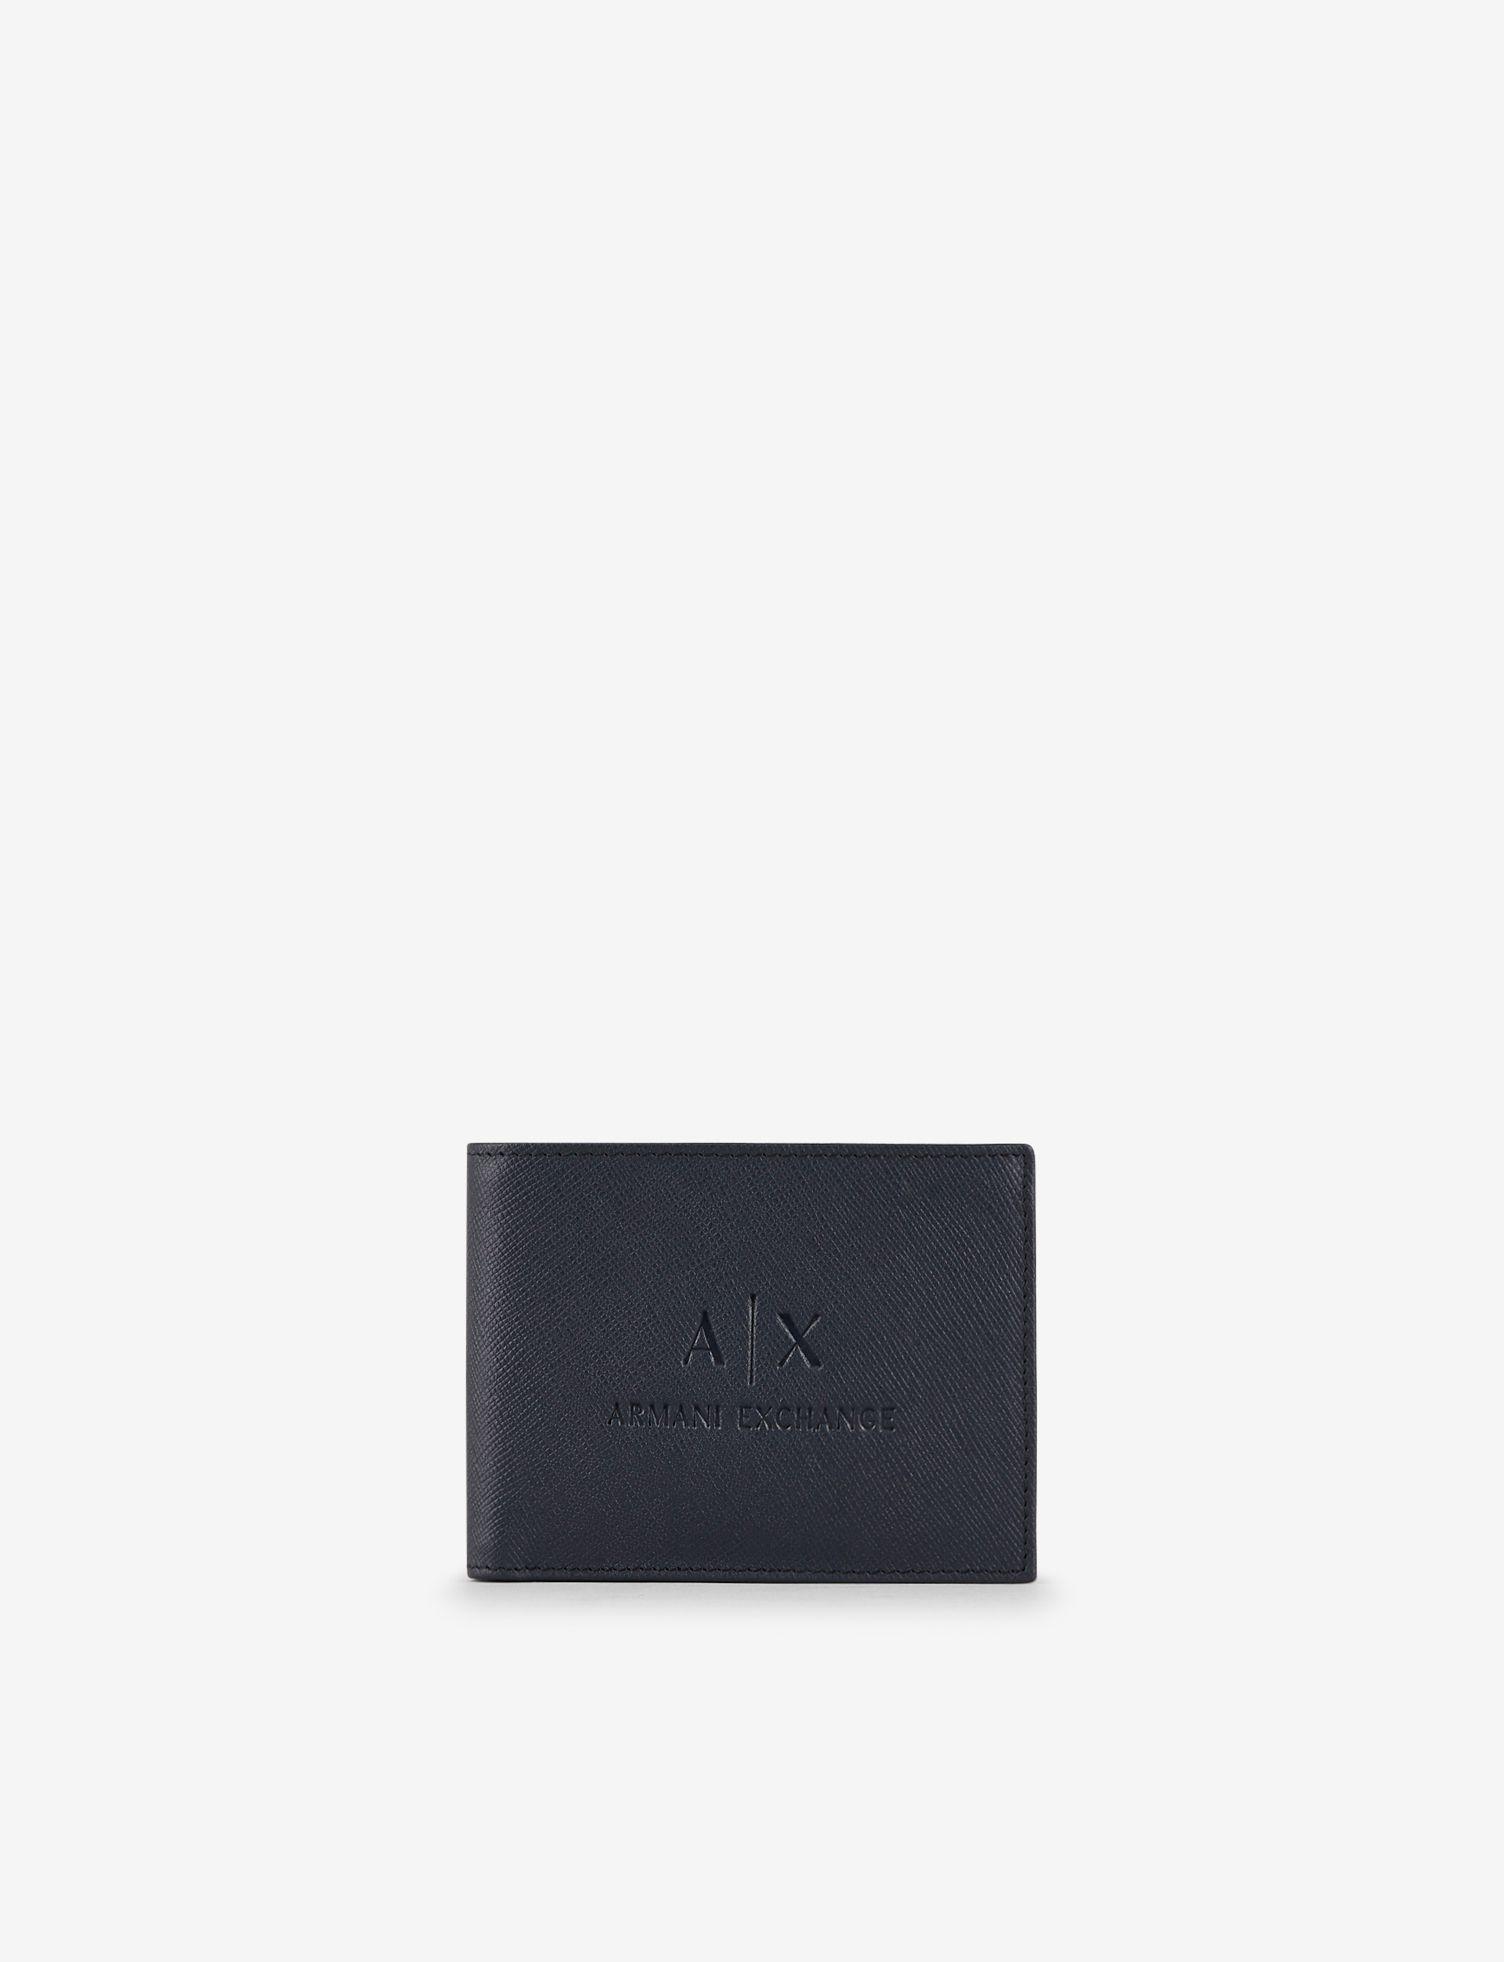 Armani Exchange Textured Leather Wallet in Navy Blue (Blue) for Men - Lyst